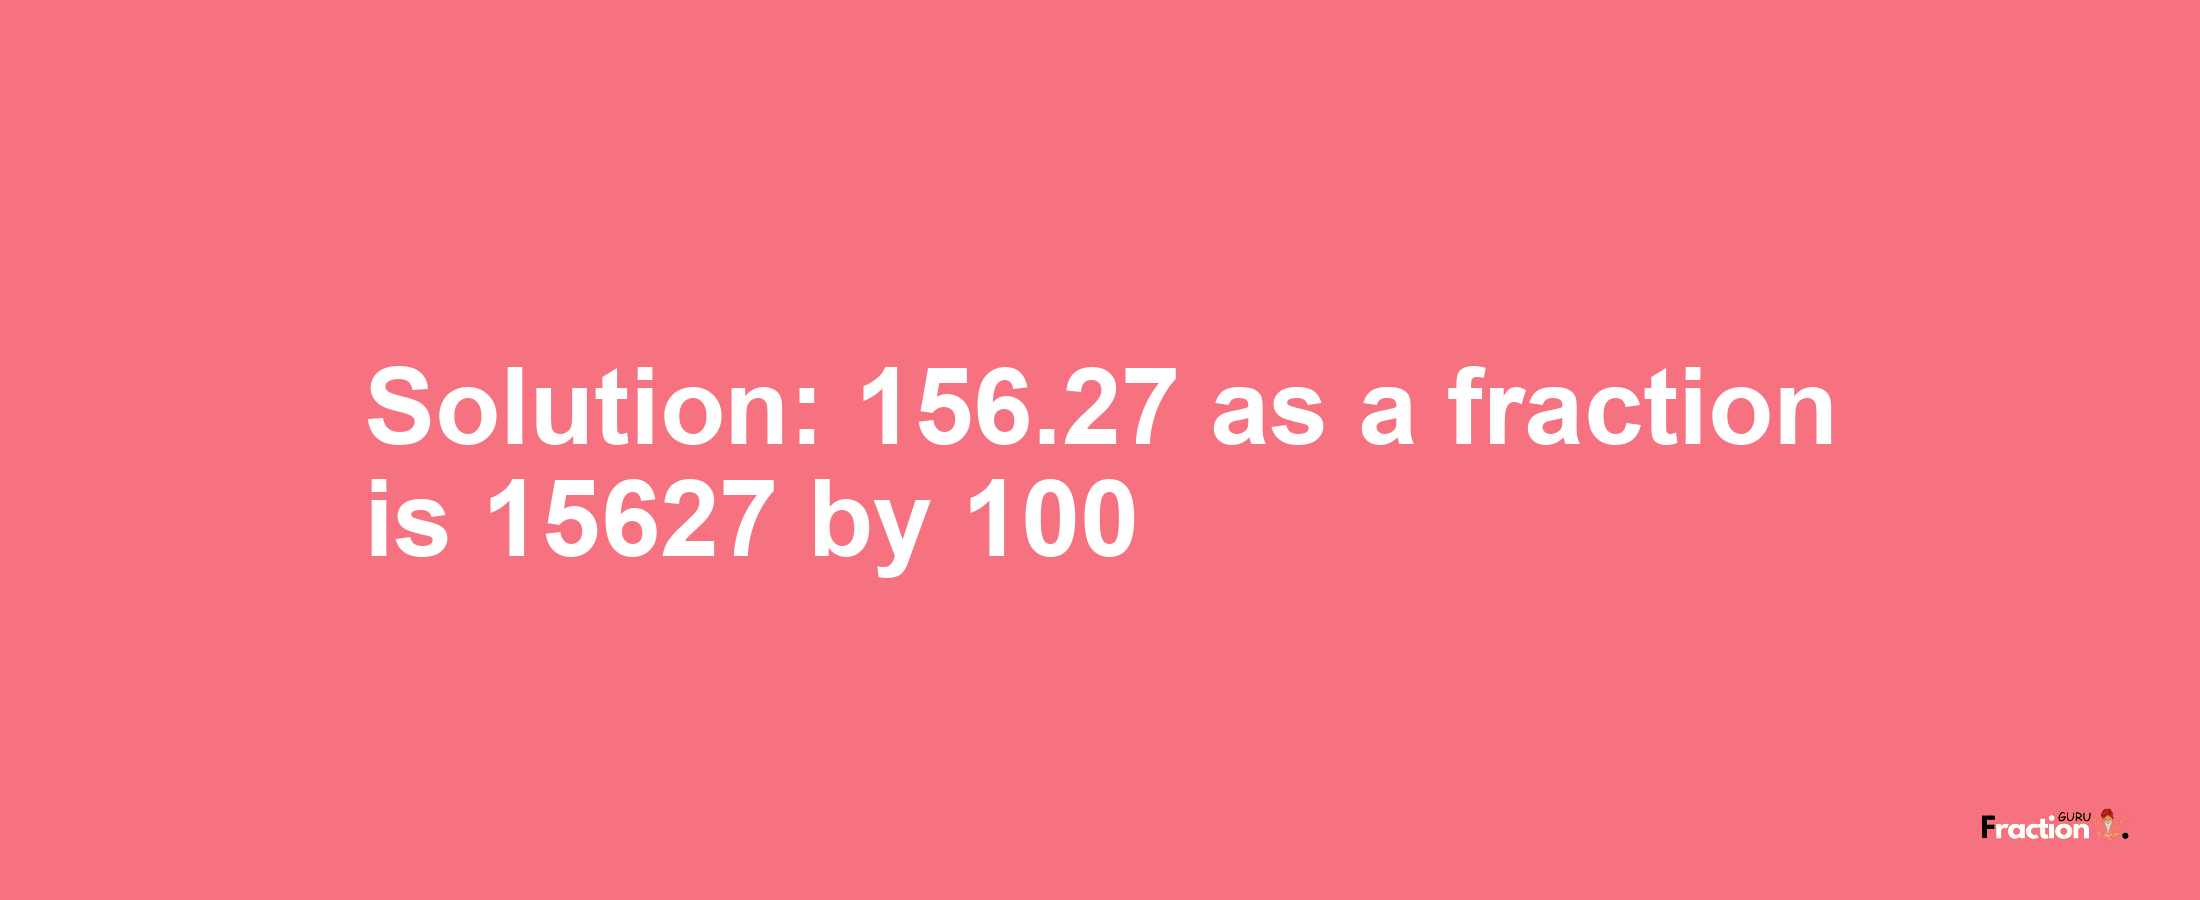 Solution:156.27 as a fraction is 15627/100